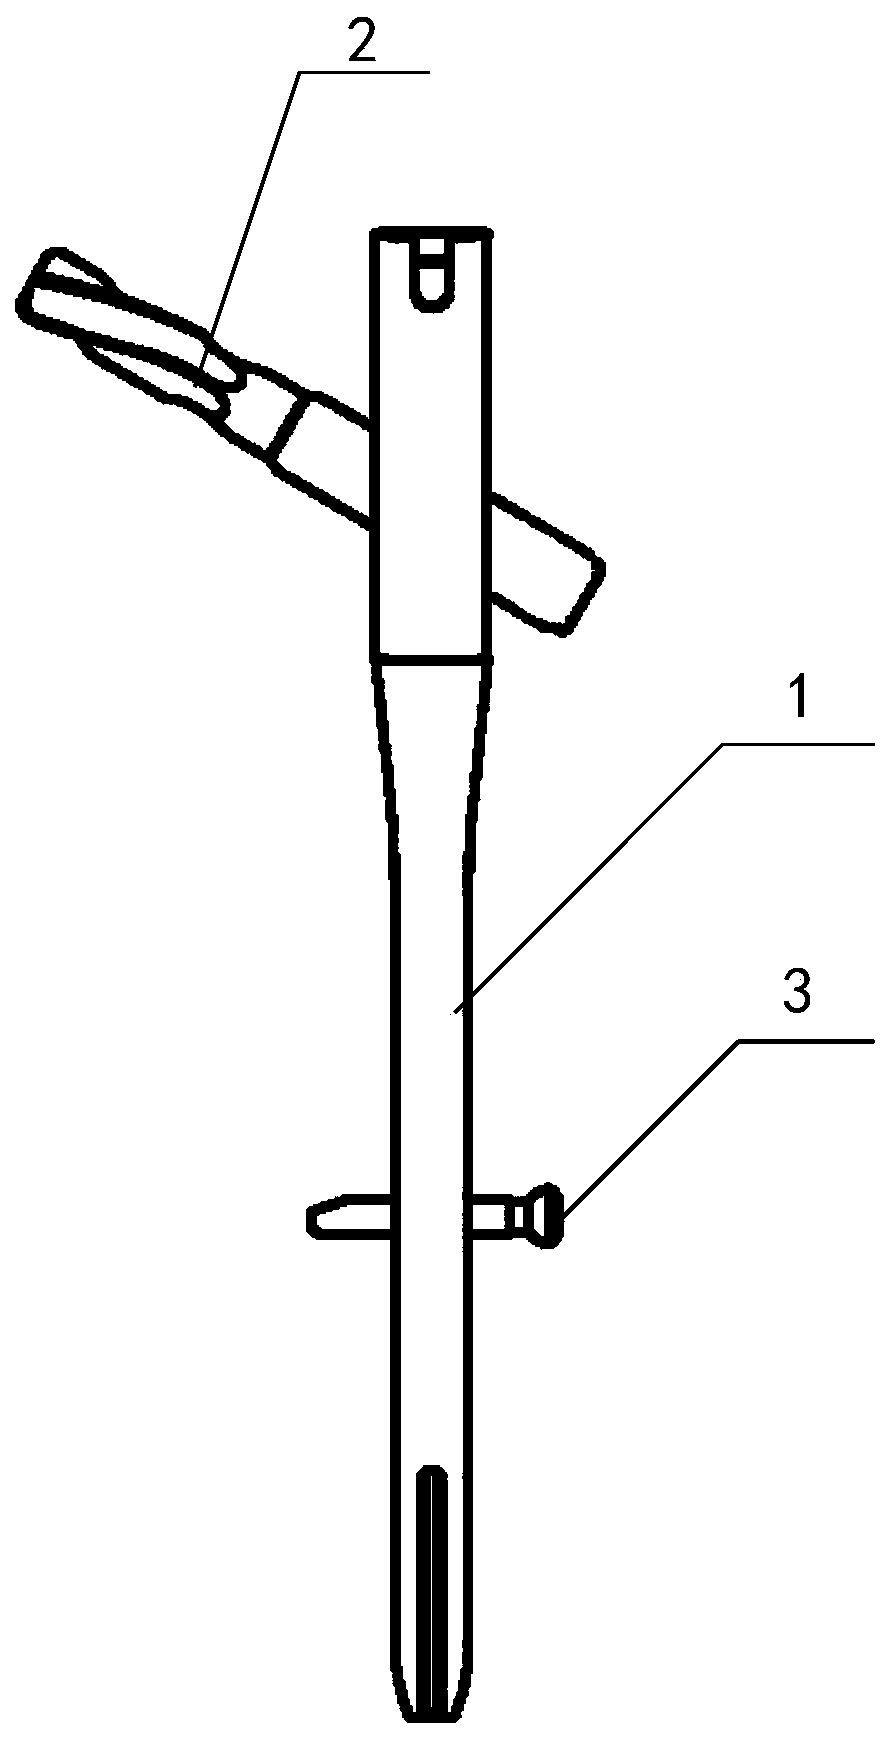 Assembled anatomical proximal femoral fracture intramedullary fixing device